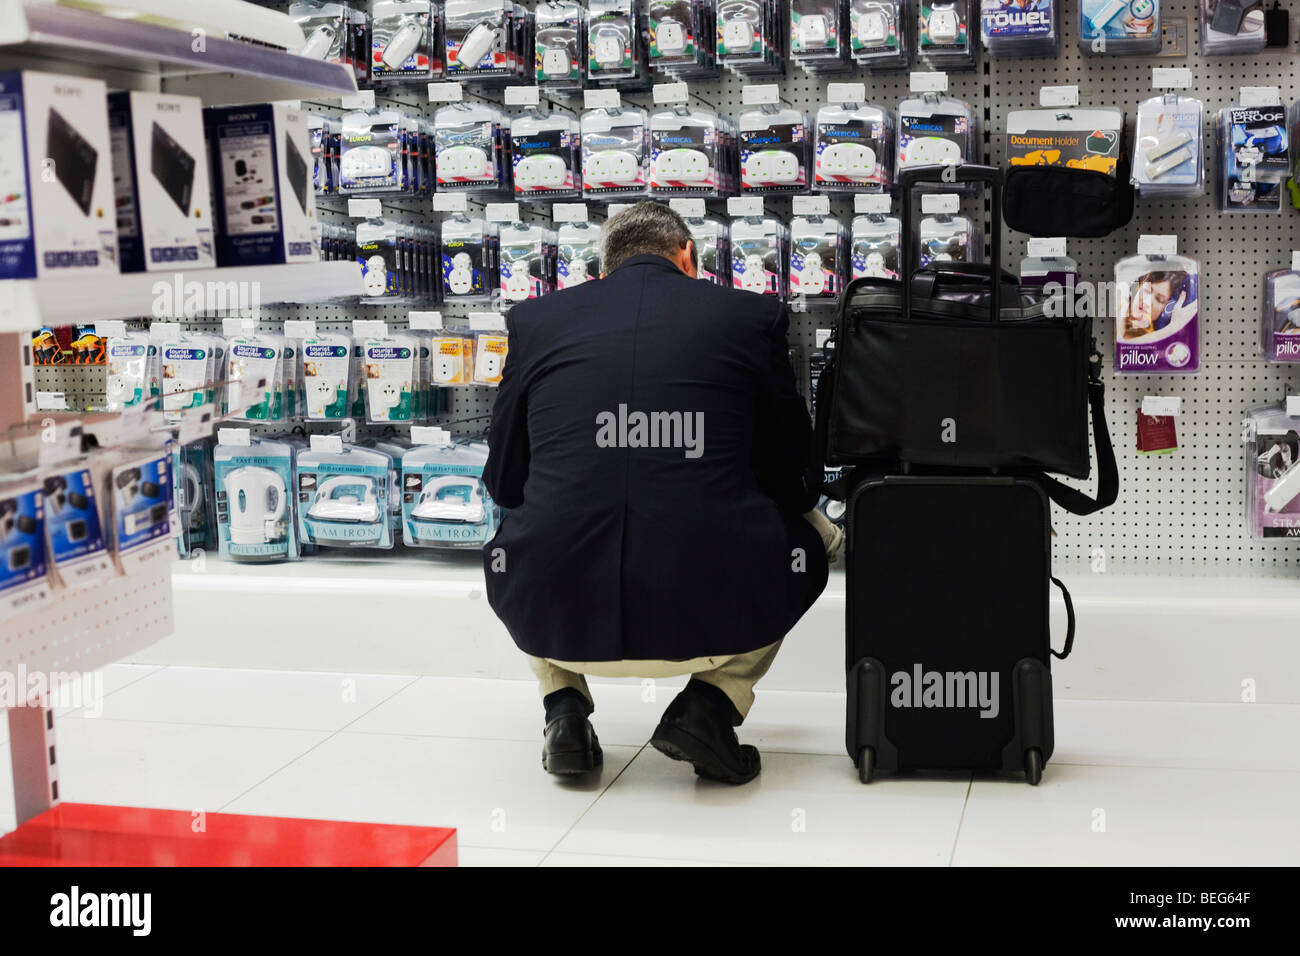 A passenger stoops to inspect travel adapters and plugs at Dixons Digital in Heathrow airport's terminal 5 Stock Photo